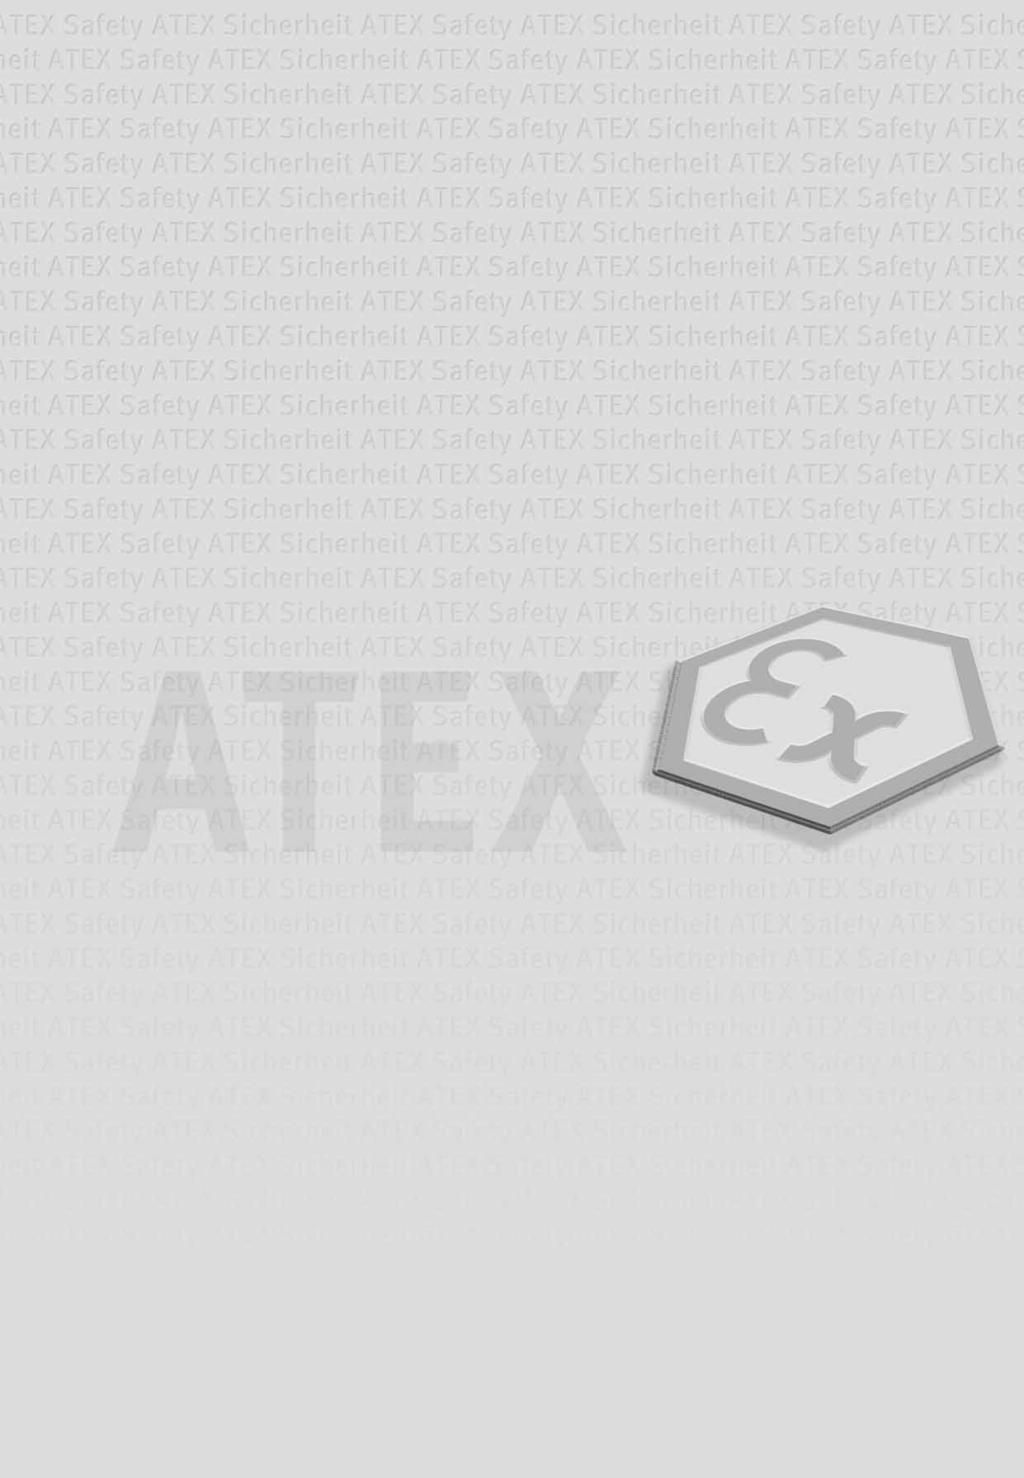 ATEX Safety Switches More than safety.